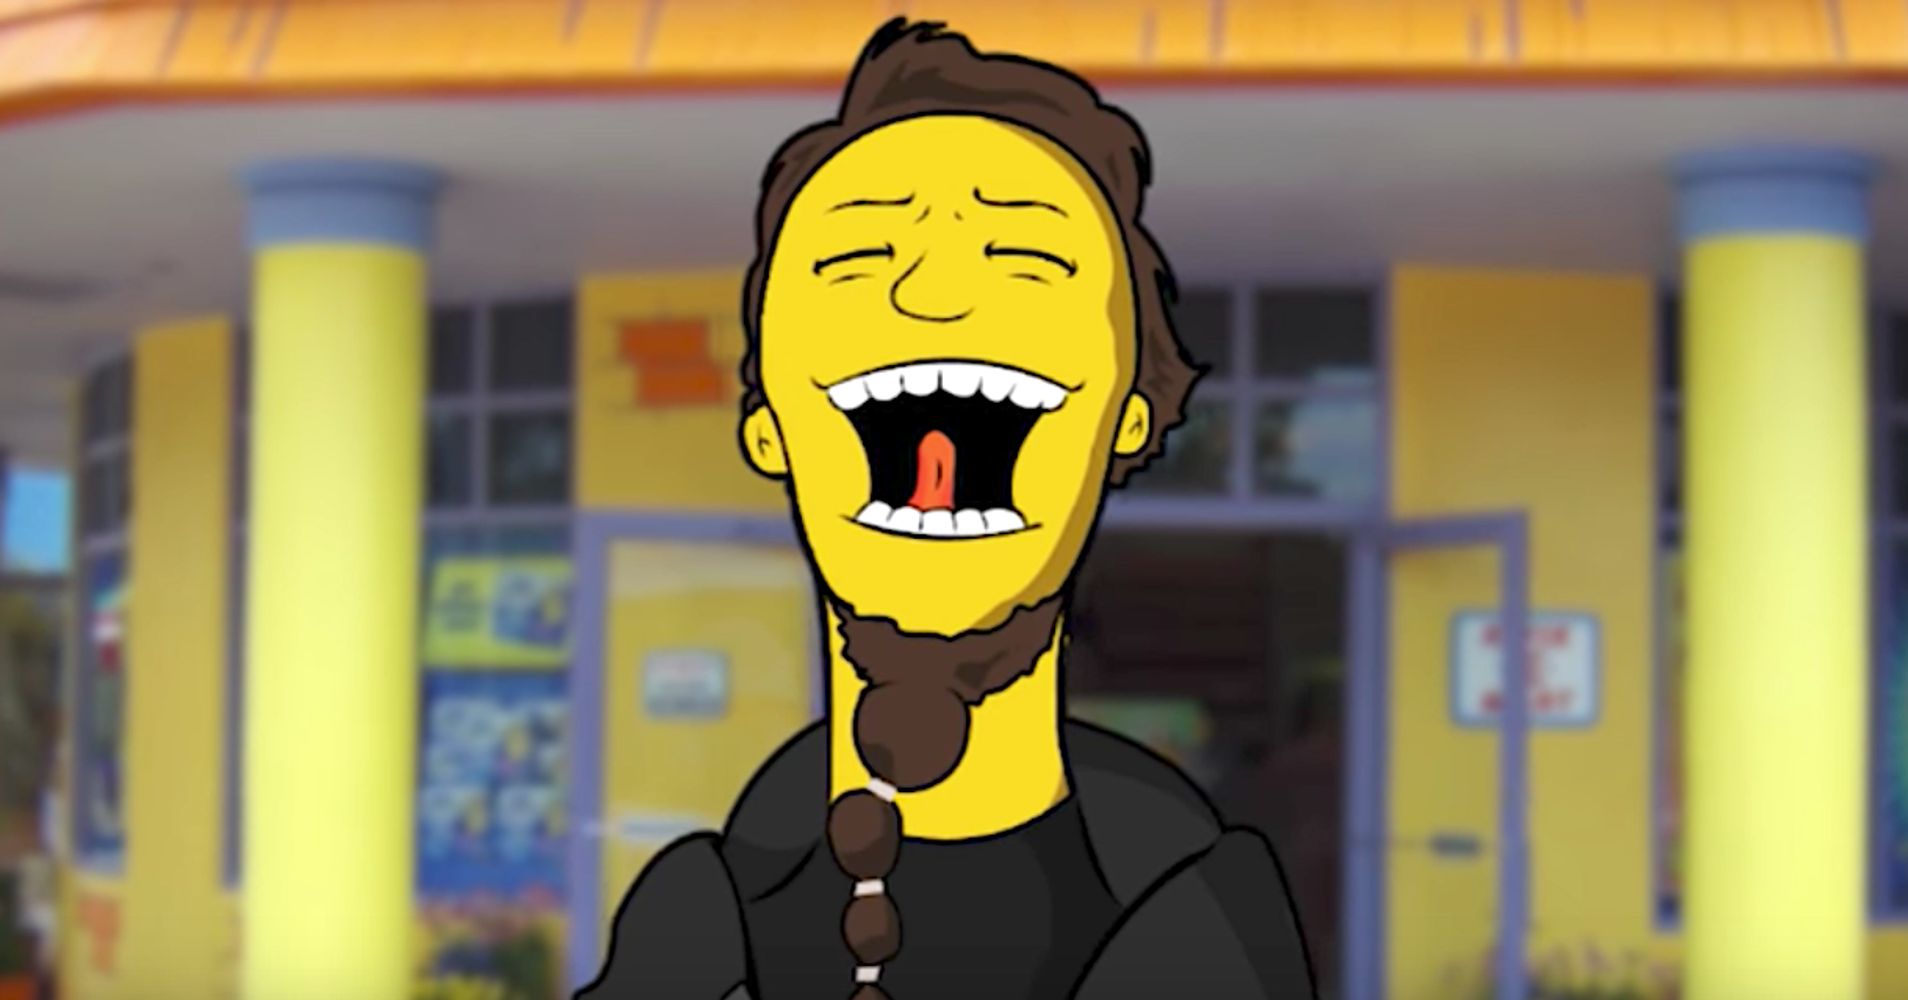 Bang Your Head To This Heavy Metal Cover Of 'The Simpsons' Theme | HuffPost